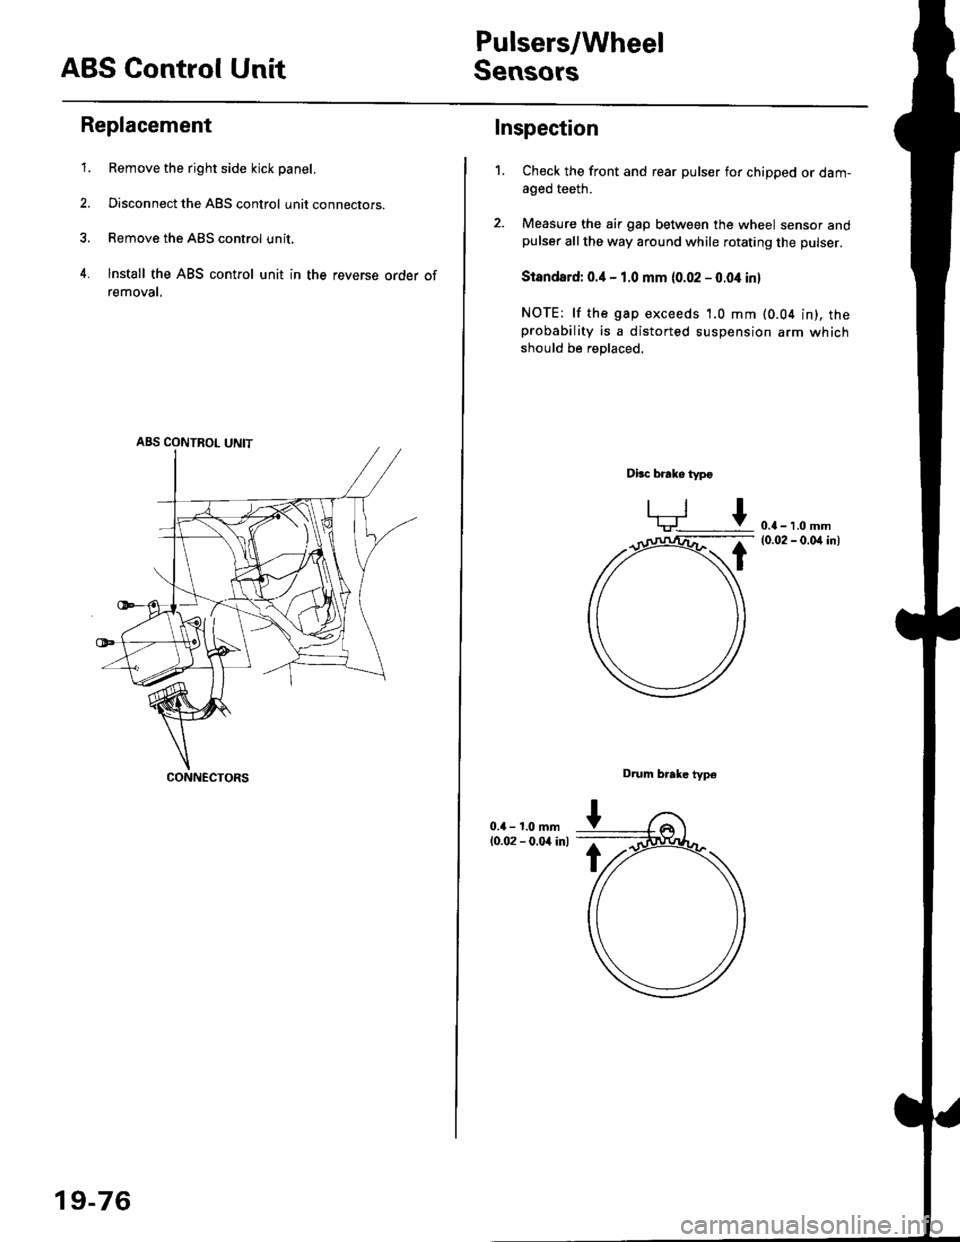 HONDA CIVIC 1997 6.G Owners Guide ABS Control Unit
Pulsers/Wheel
Sensors
Replacement
1. Remove the right side kick panel.
2. Disconnect the ABS control unit connecrors.
3. Remove the ABS control unit,
4. lnstall the ABS control unit i